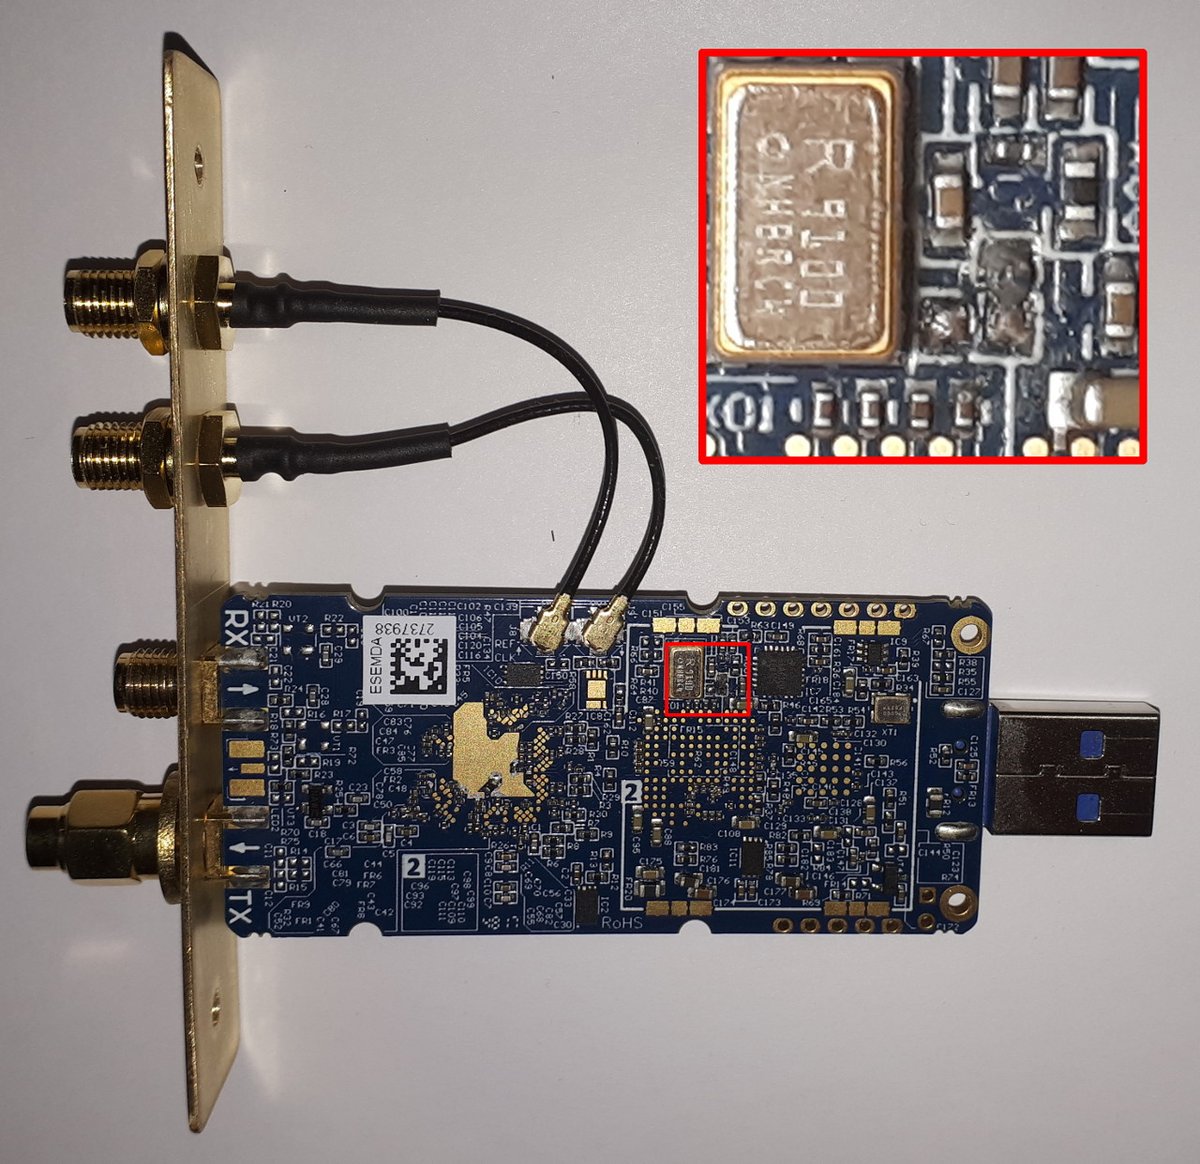 Surgery went smoothly but patient woke up brain dead ('Read(64 bytes) failed'). Is there anything I should know about modding the #LimeSDR Mini for external reference ? Could a noisy clock affect basic functionality such as 'LimeUtil --update' ?